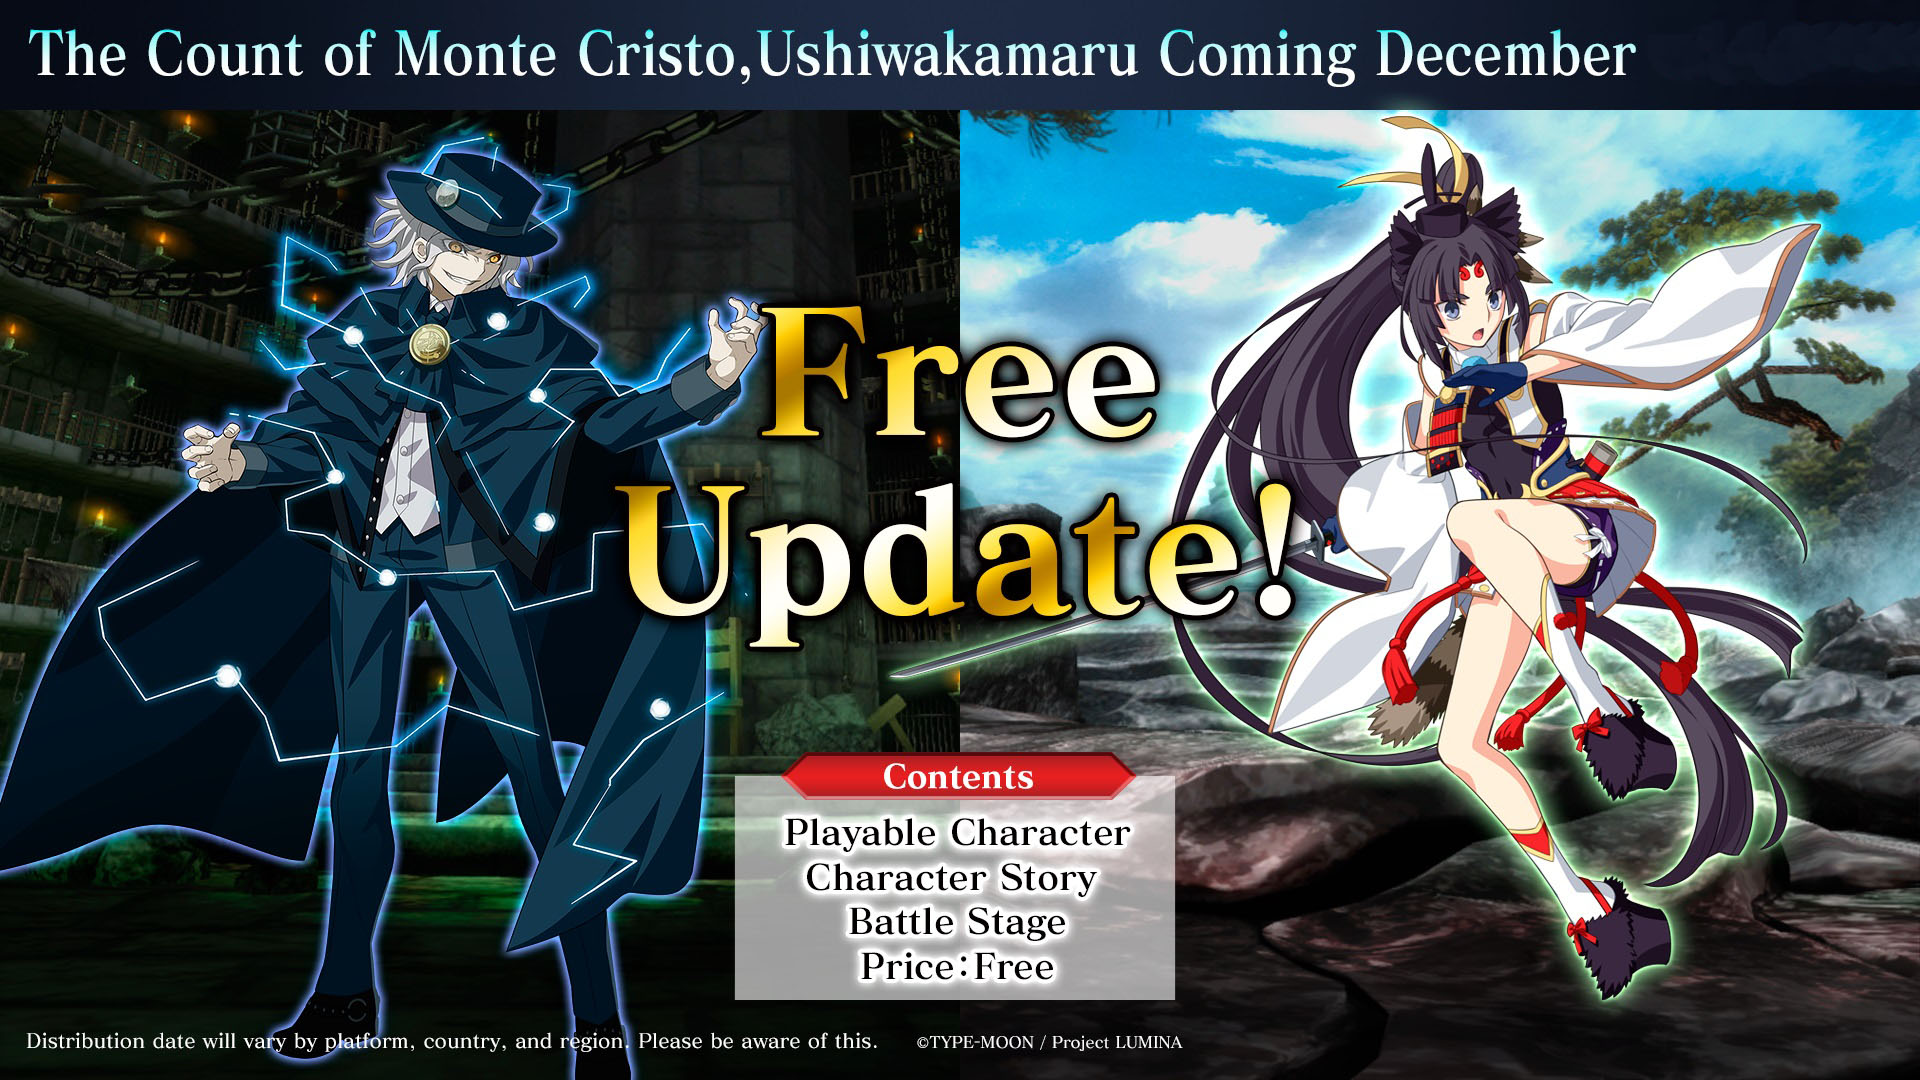 Melty Blood: Type Lumina DLC characters Count of Monte Cristo and Ushiwakamaru announced